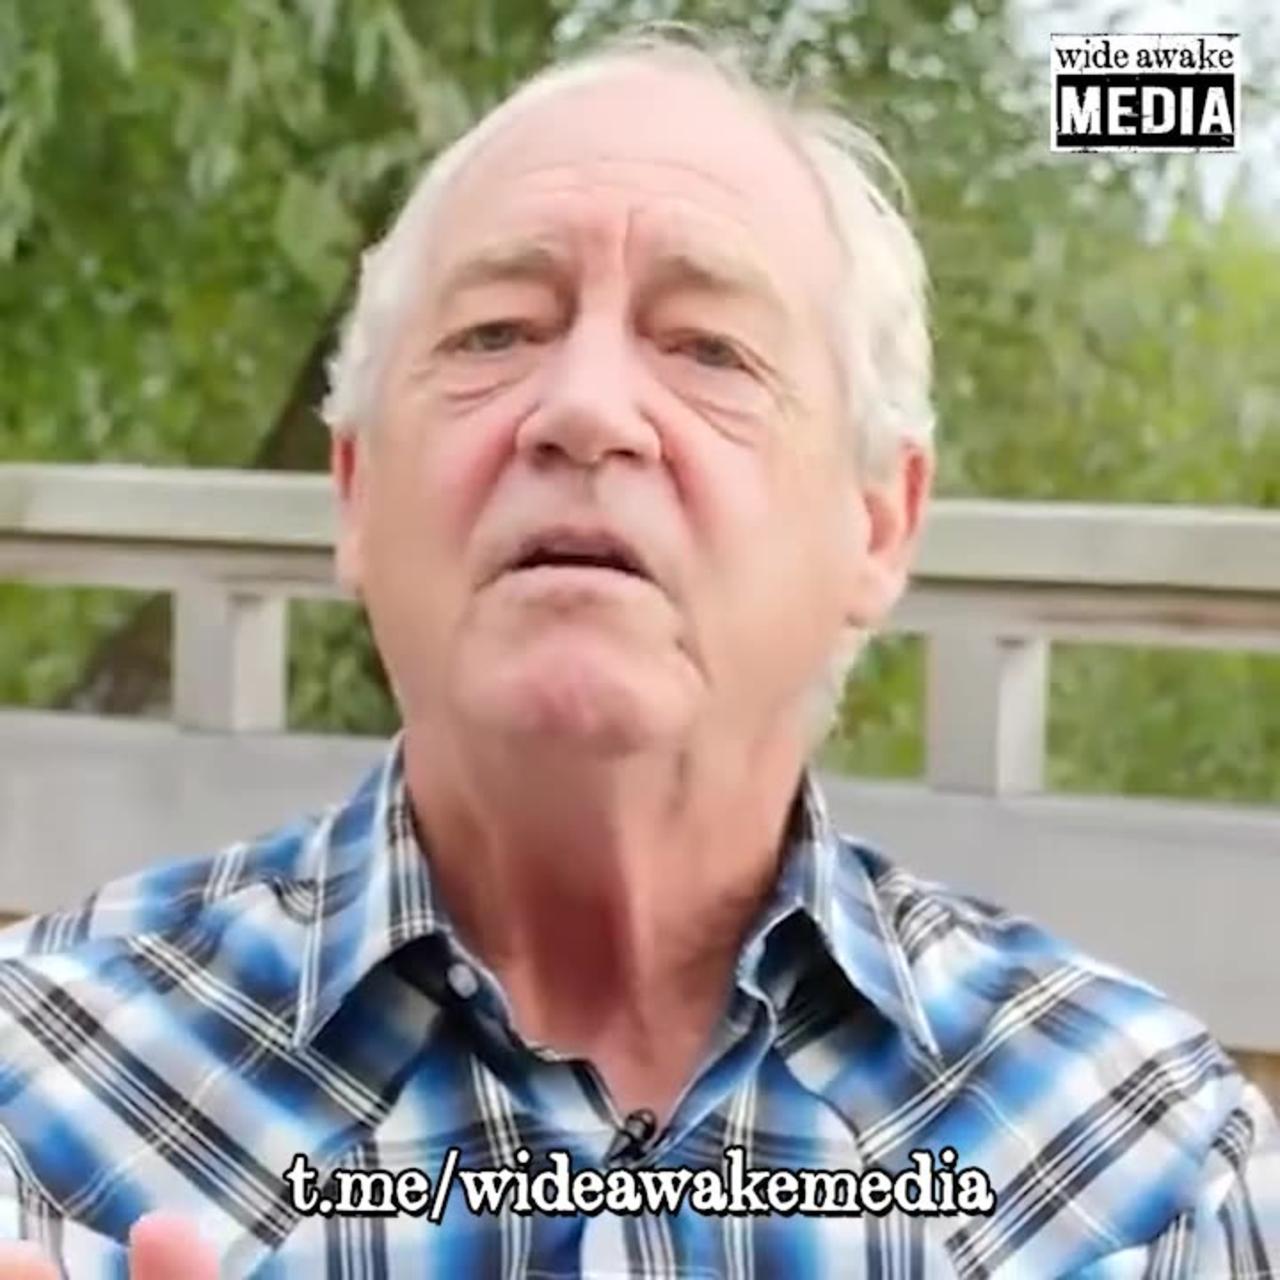 Greenpeace co-founder, Patrick Moore, exposes the UN's Intergovernmental Panel on Climate Change